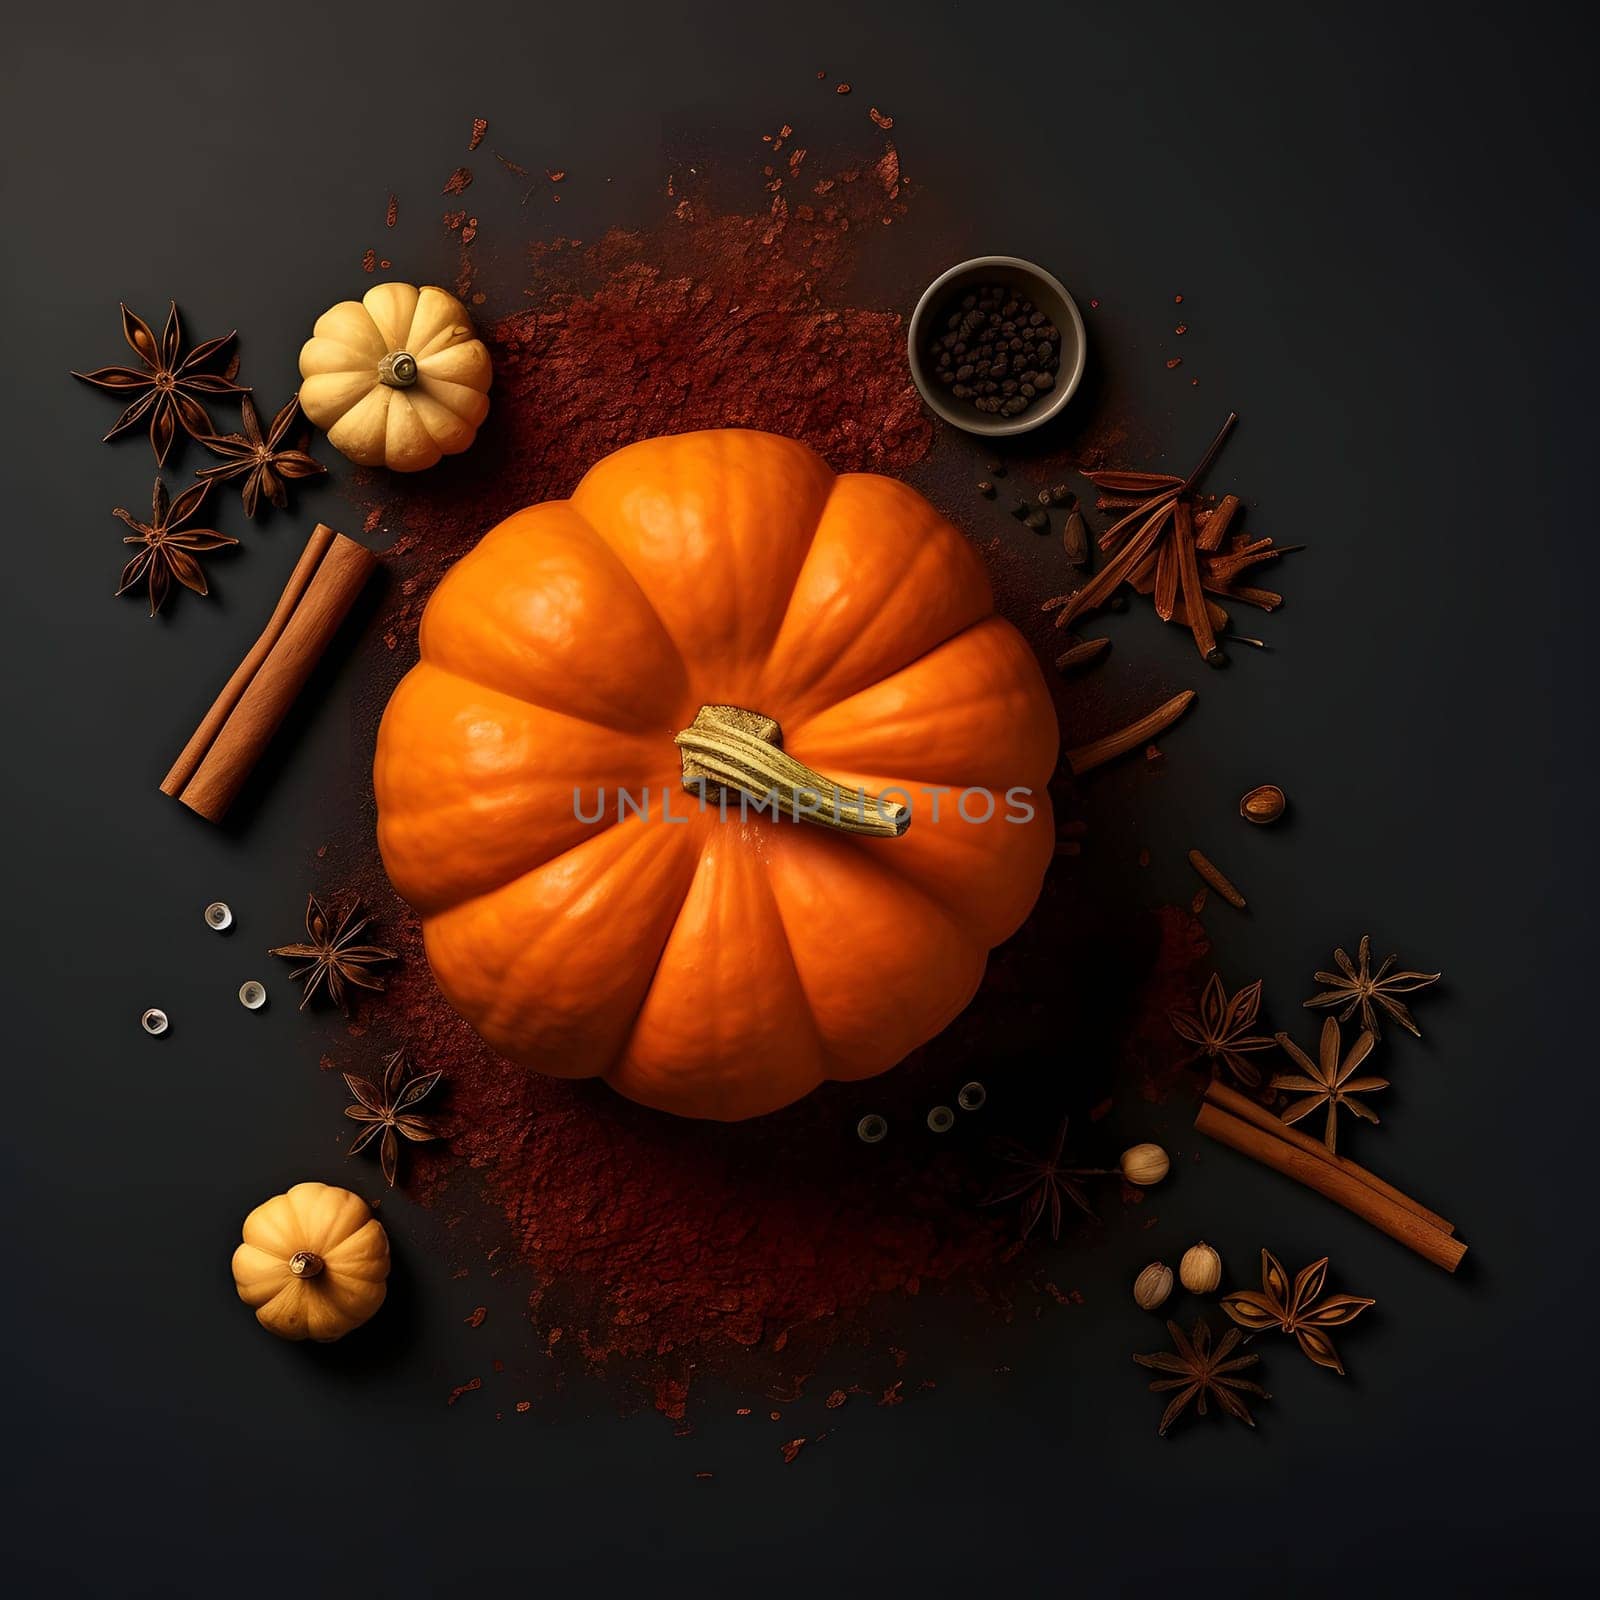 An aerial view of an orange pumpkin on a dark background, with spices all around. Pumpkin as a dish of thanksgiving for the harvest. The atmosphere of joy and celebration.